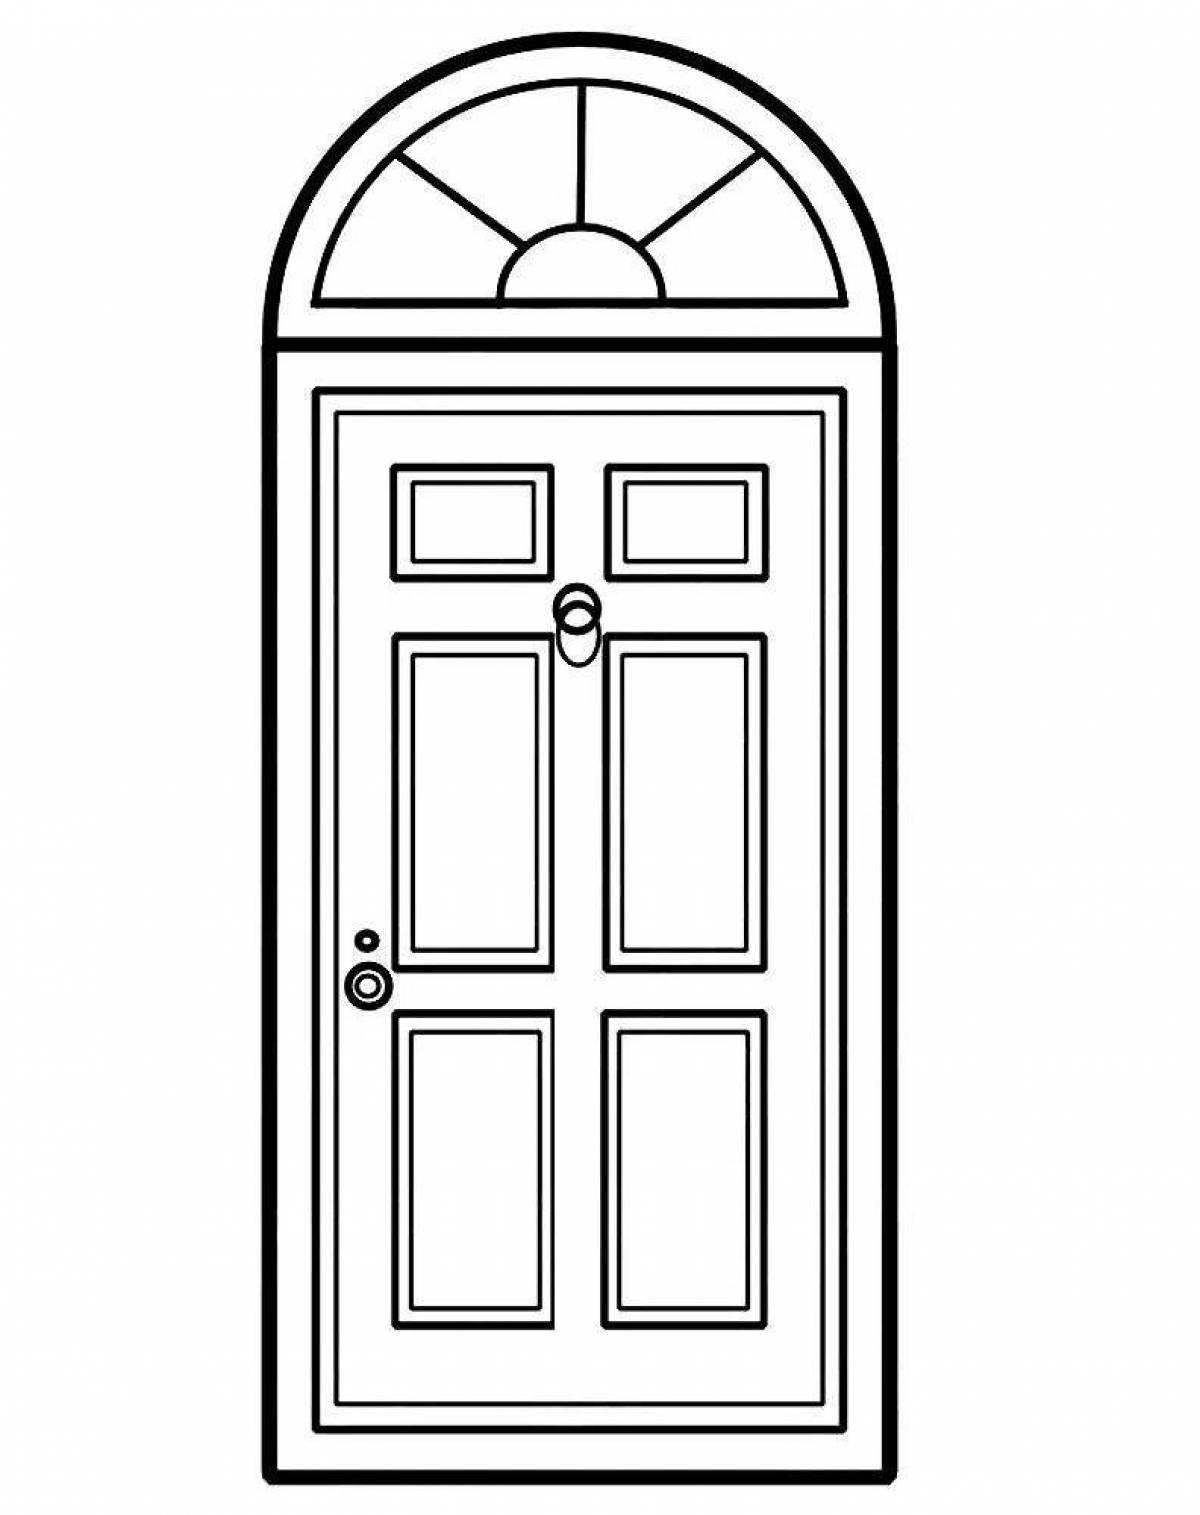 Innovative dors coloring pages